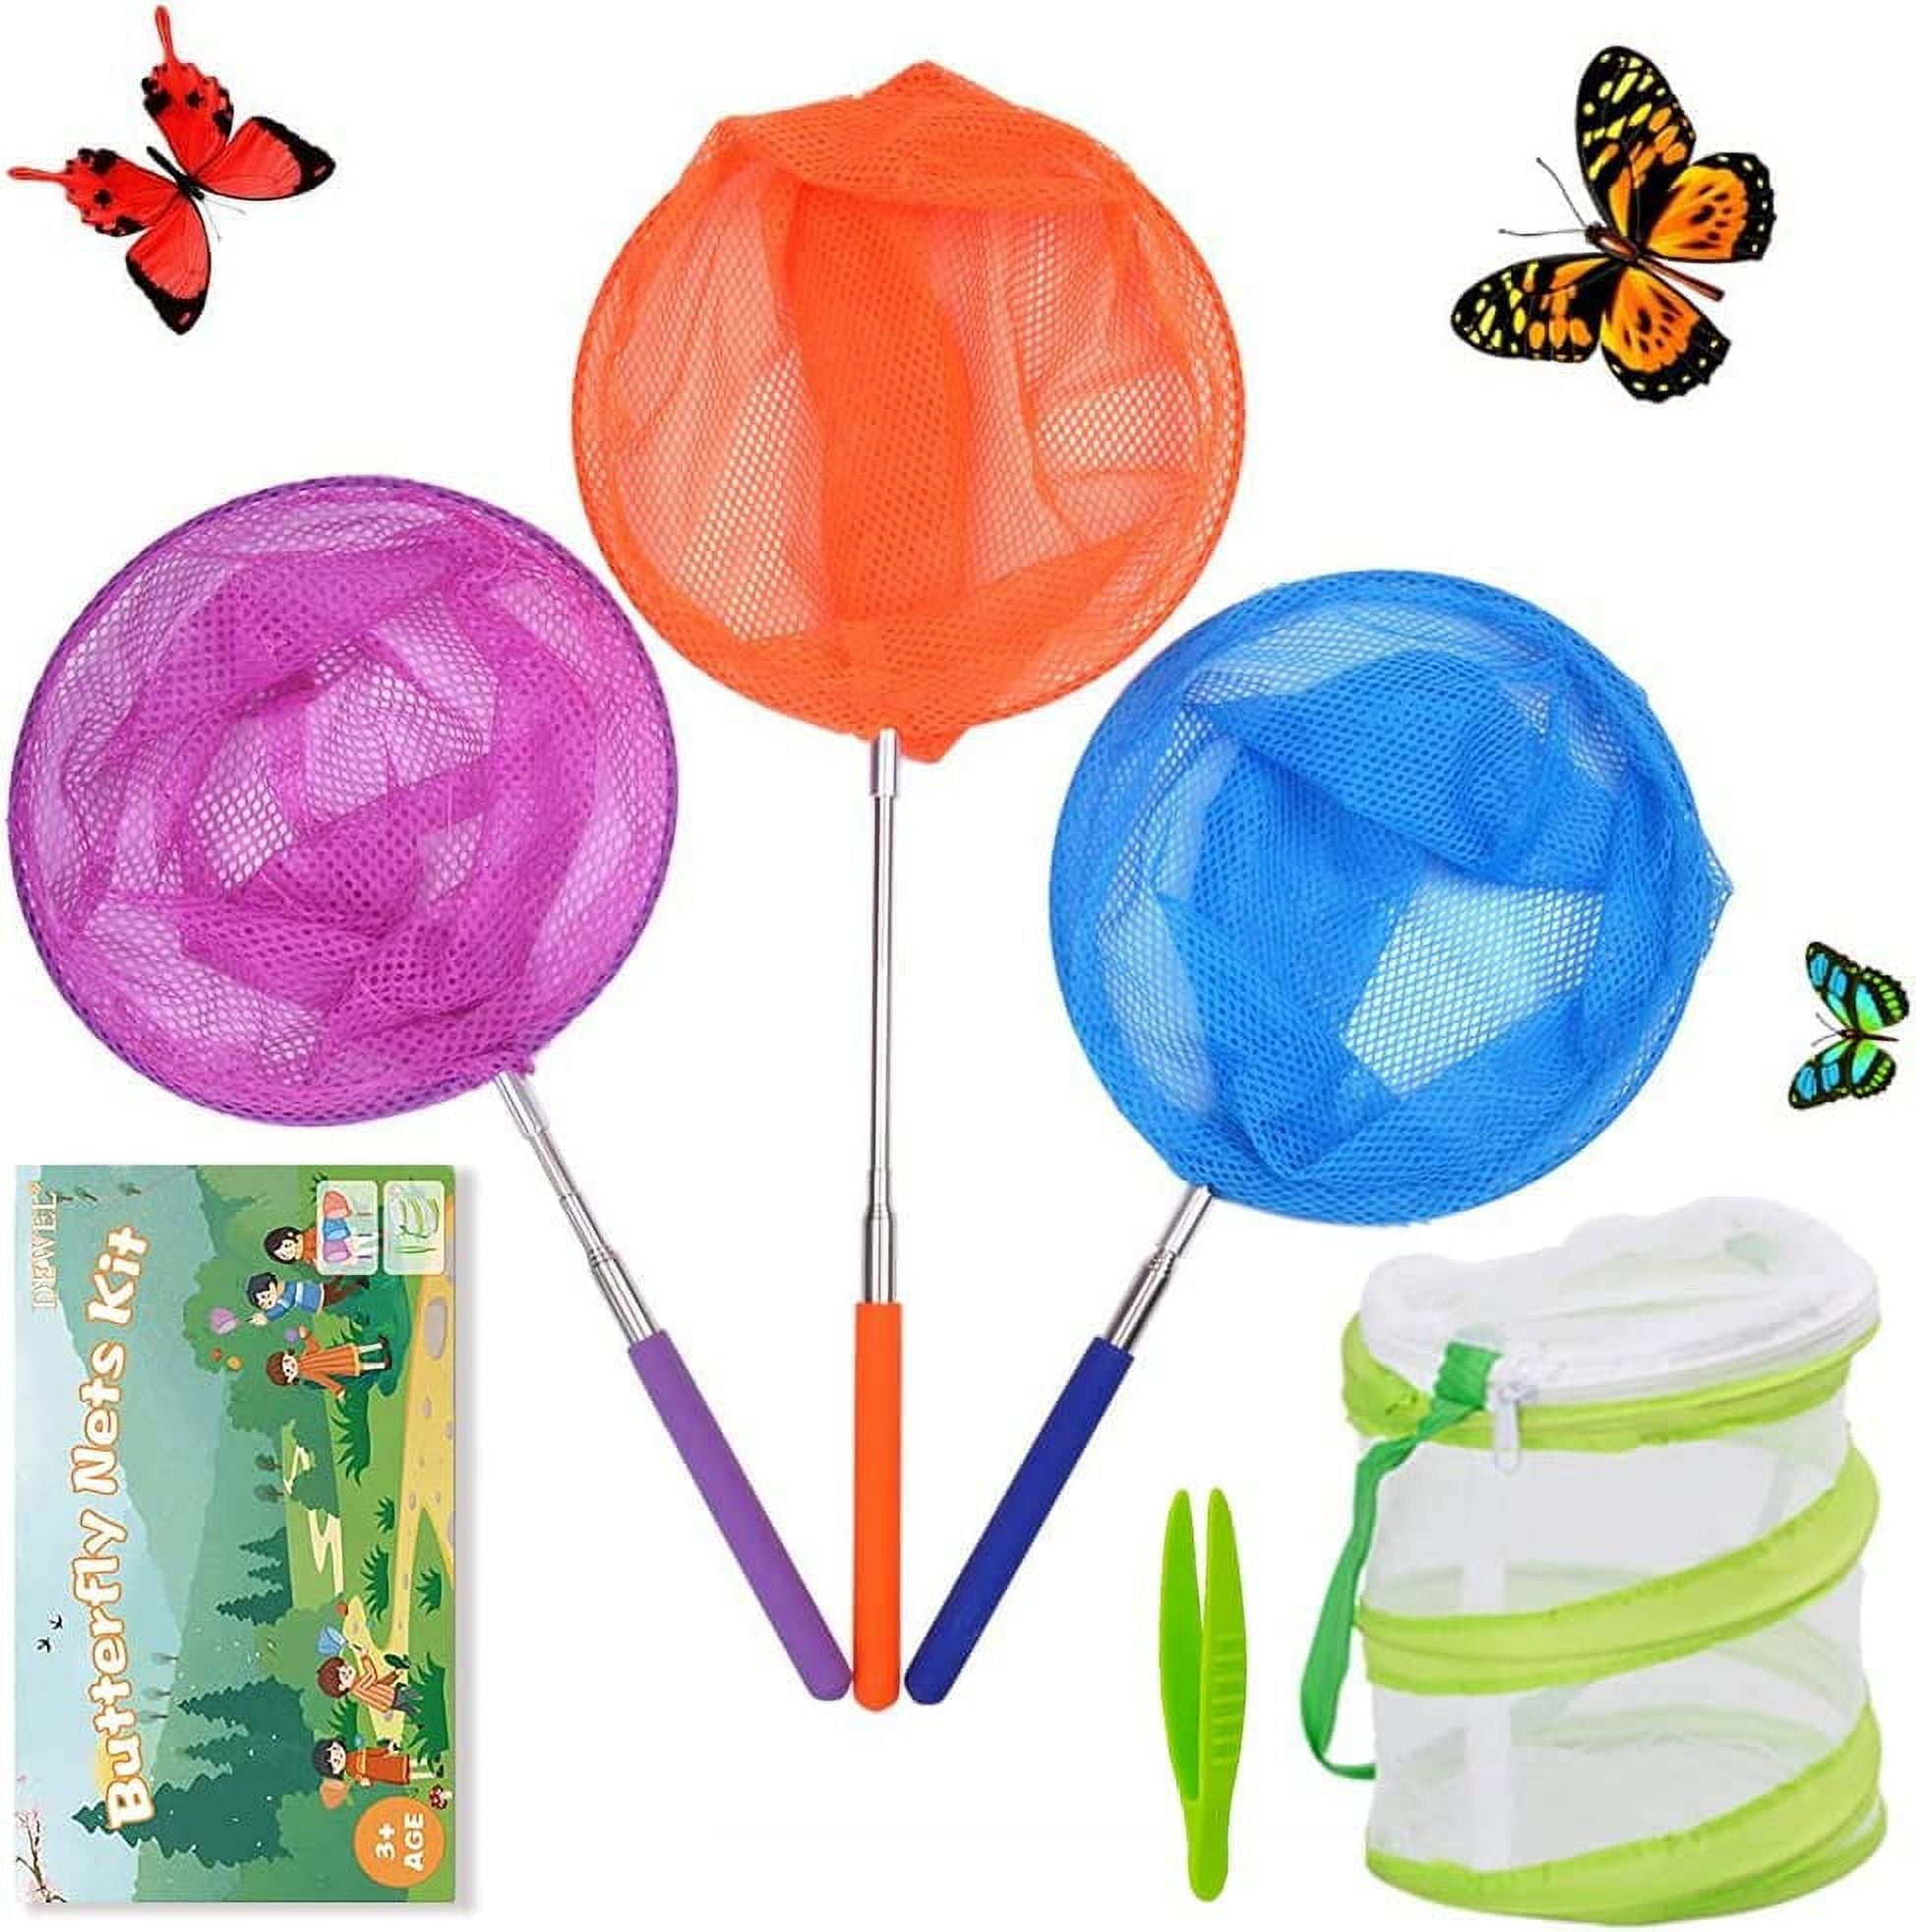 DEWEL 3 Pack Colored Telescopic Butterfly and Bug Catching Nets Kits for  Kids Insect Catching Net Extendable 34 Inches,Pop up Insect Mesh